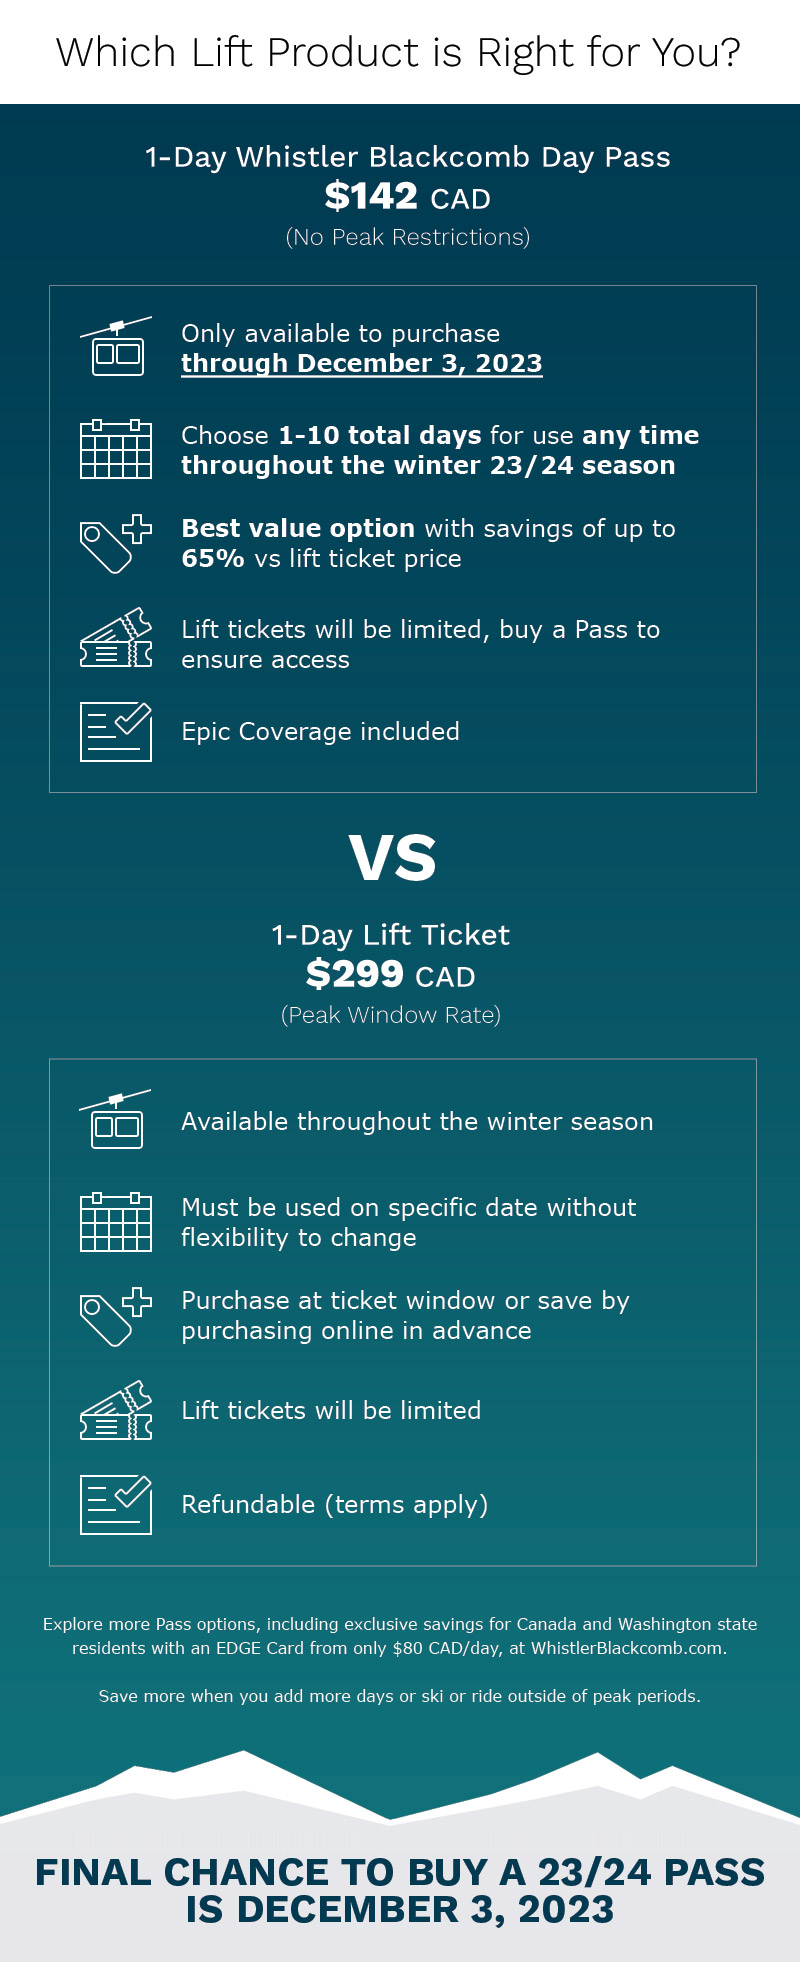 Whistler Blackcomb Day Pass information